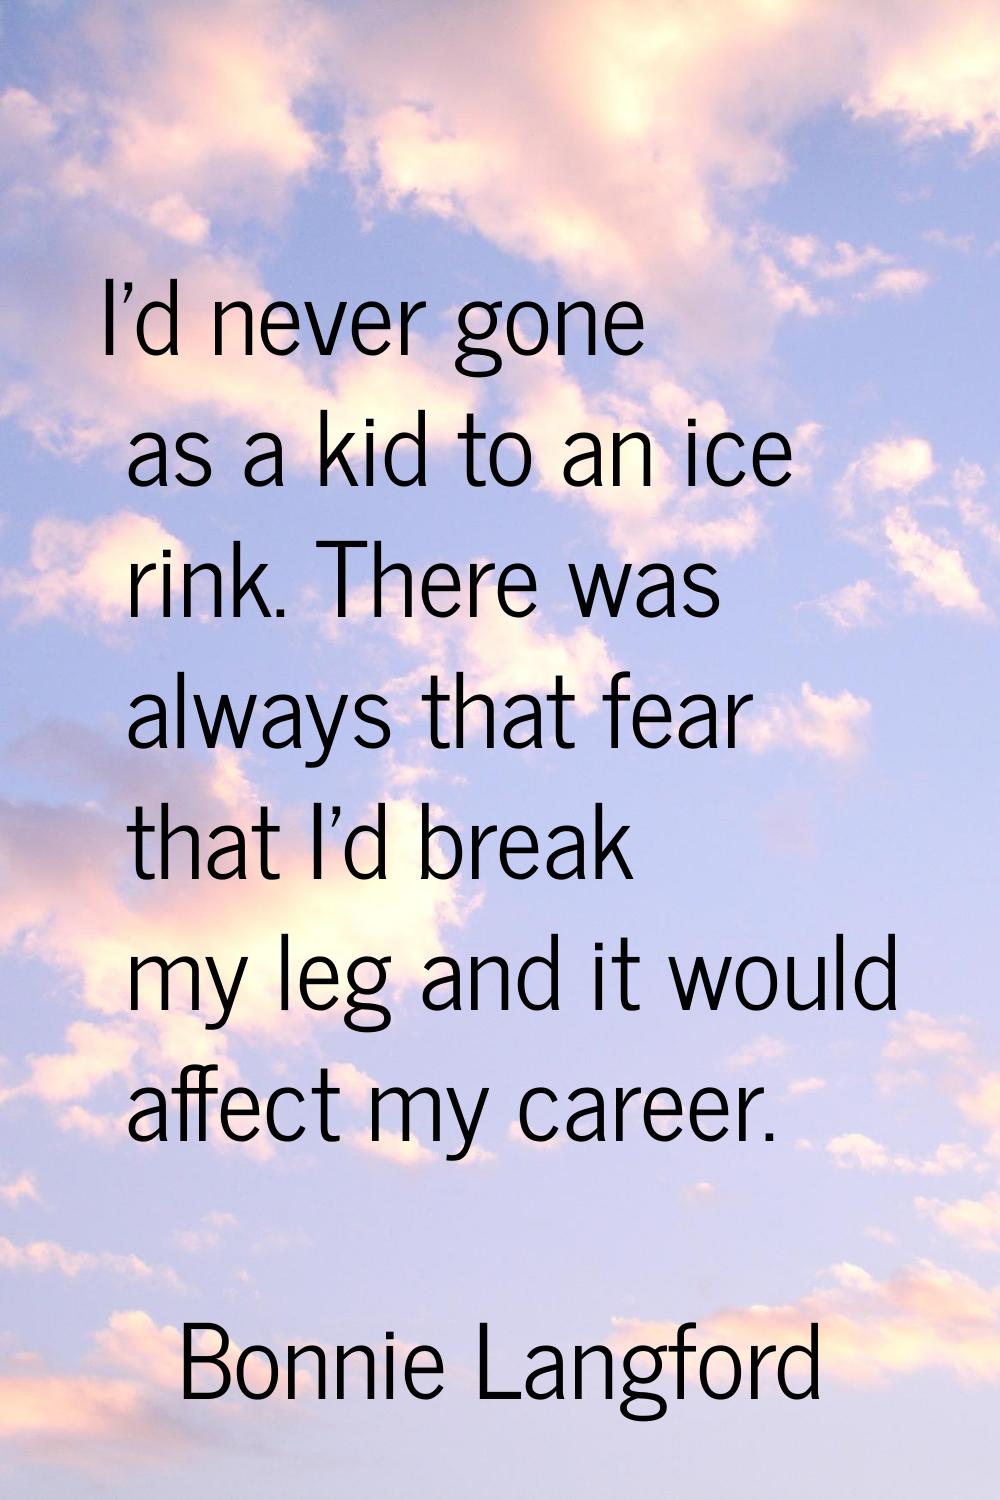 I'd never gone as a kid to an ice rink. There was always that fear that I'd break my leg and it wou